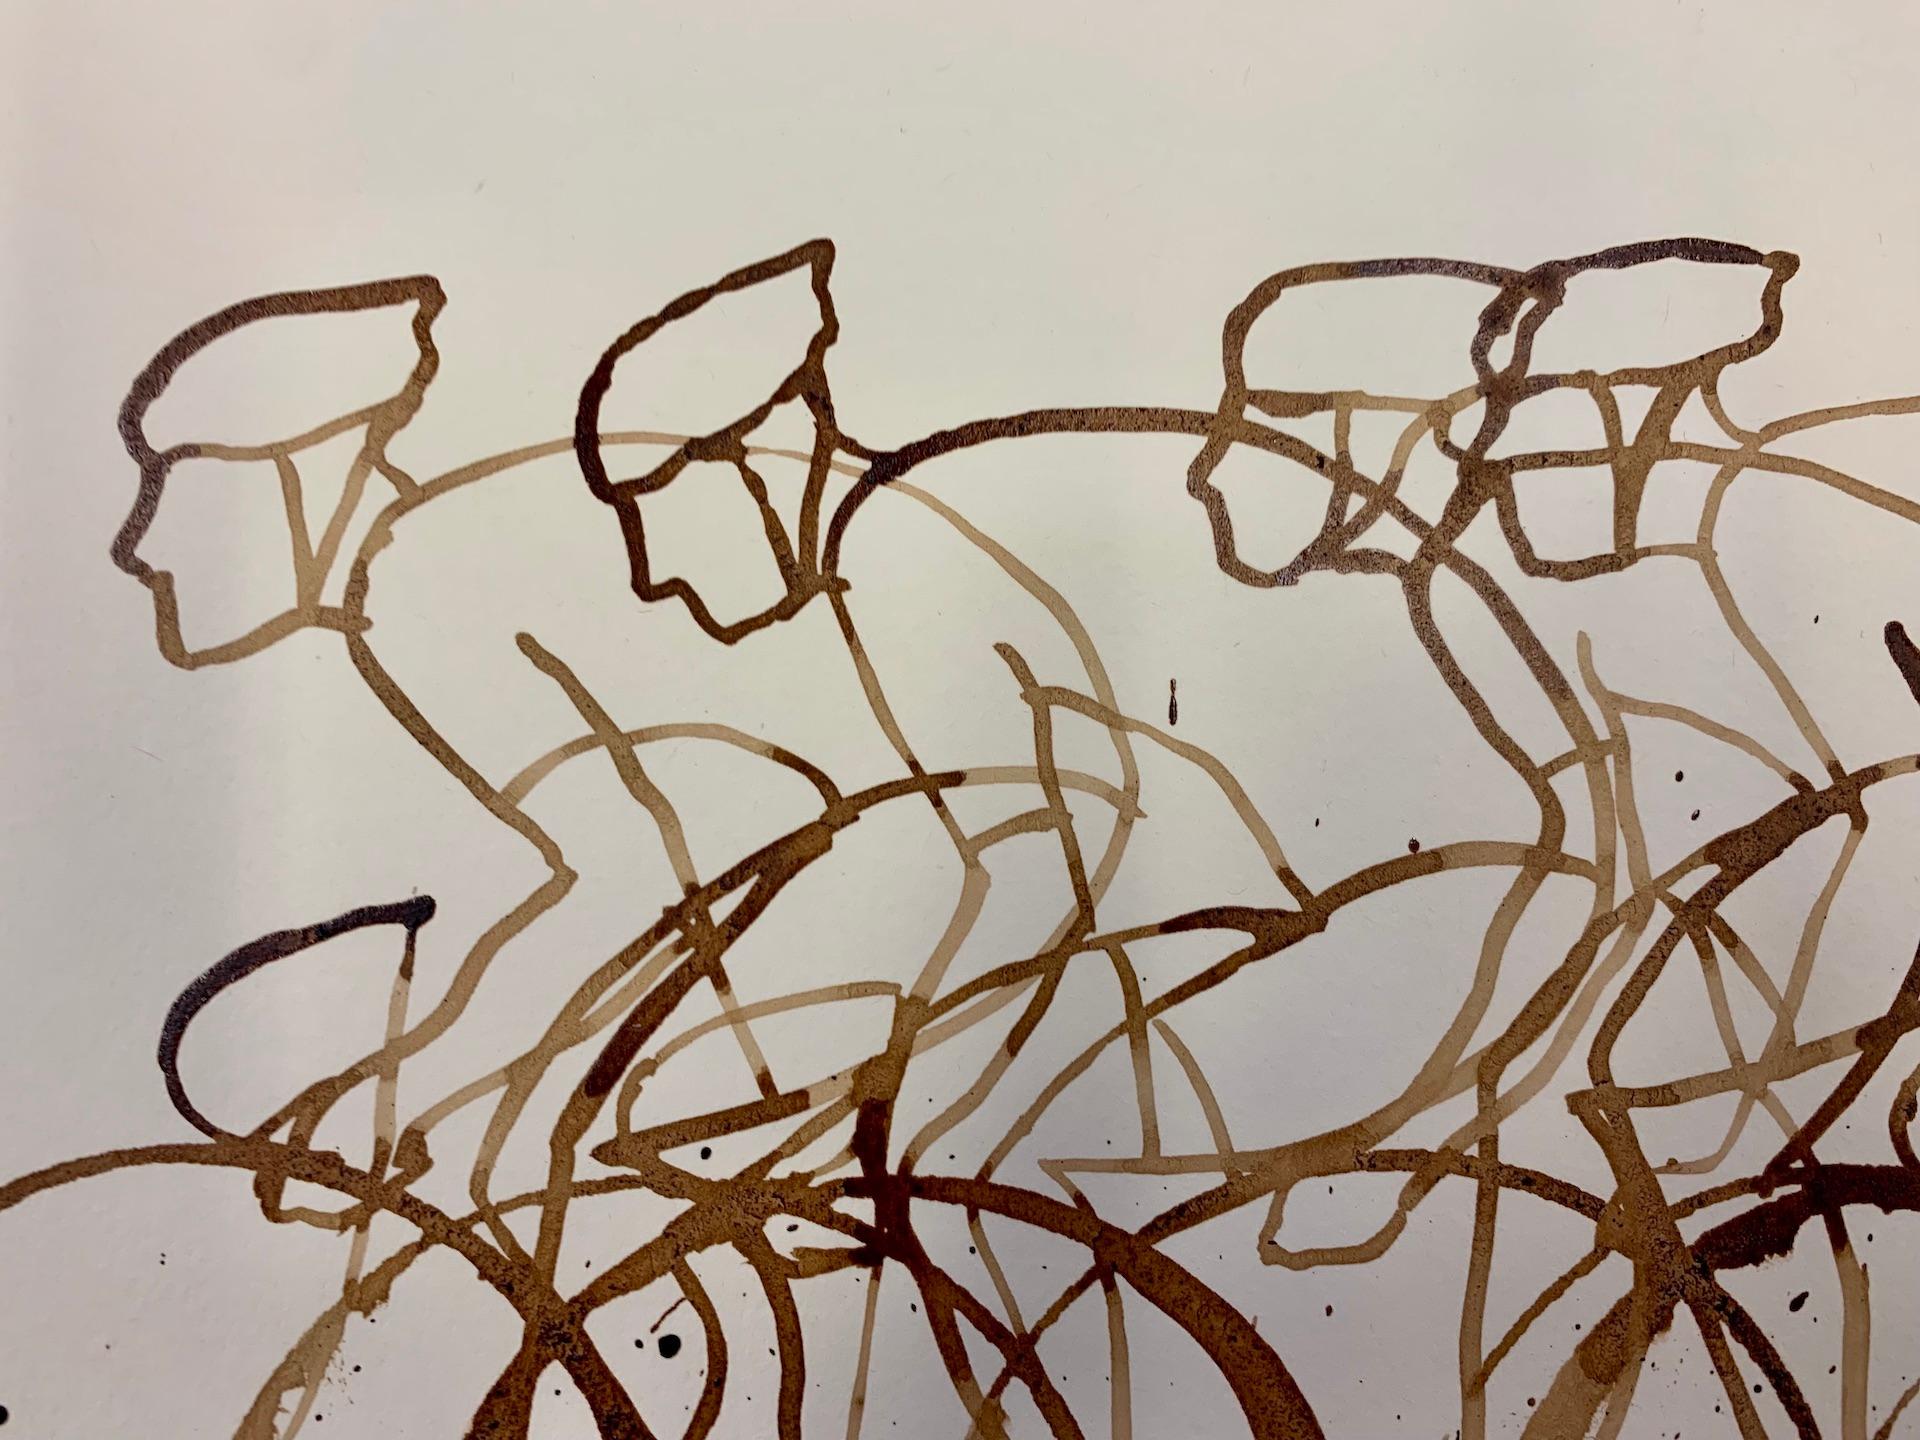 Coffee Peloton Series XVII by Eliza Southwood [2021]
original

Coffee on paper

Image size: H:42 cm x W:59.5 cm

Complete Size of Unframed Work: H:42 cm x W:59.5 cm x D:0.1cm

Sold Unframed

Please note that insitu images are purely an indication of